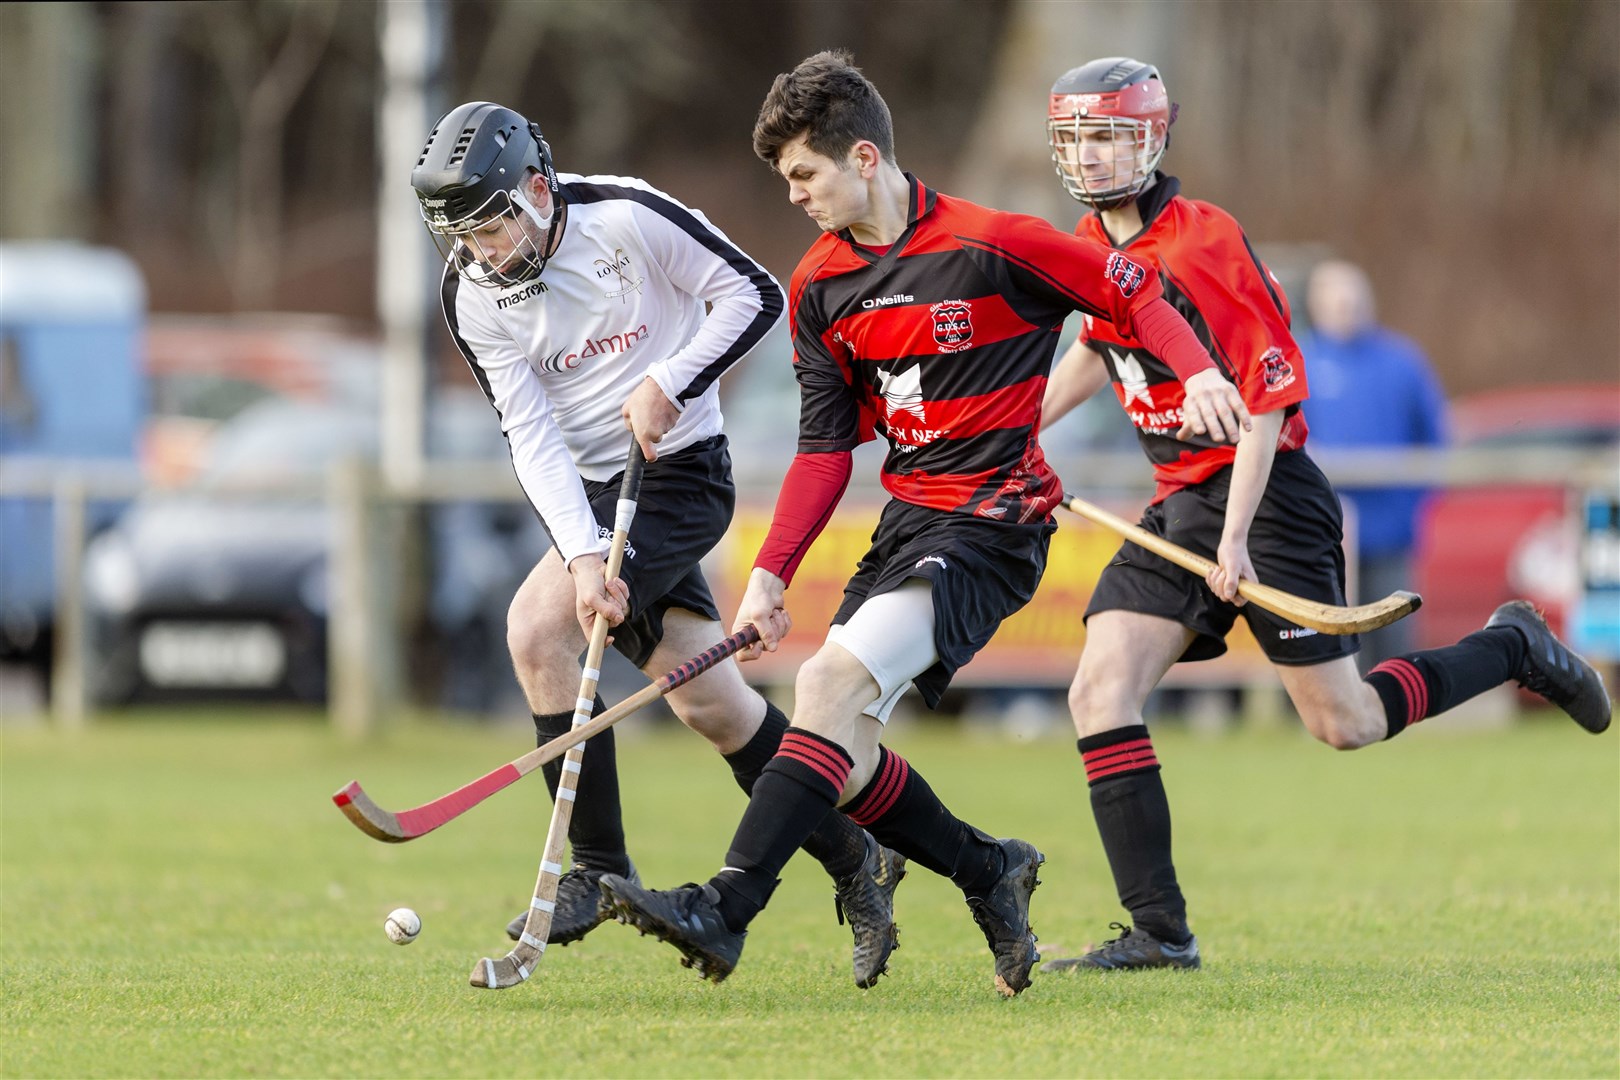 Plans have been announced for the return of shinty.